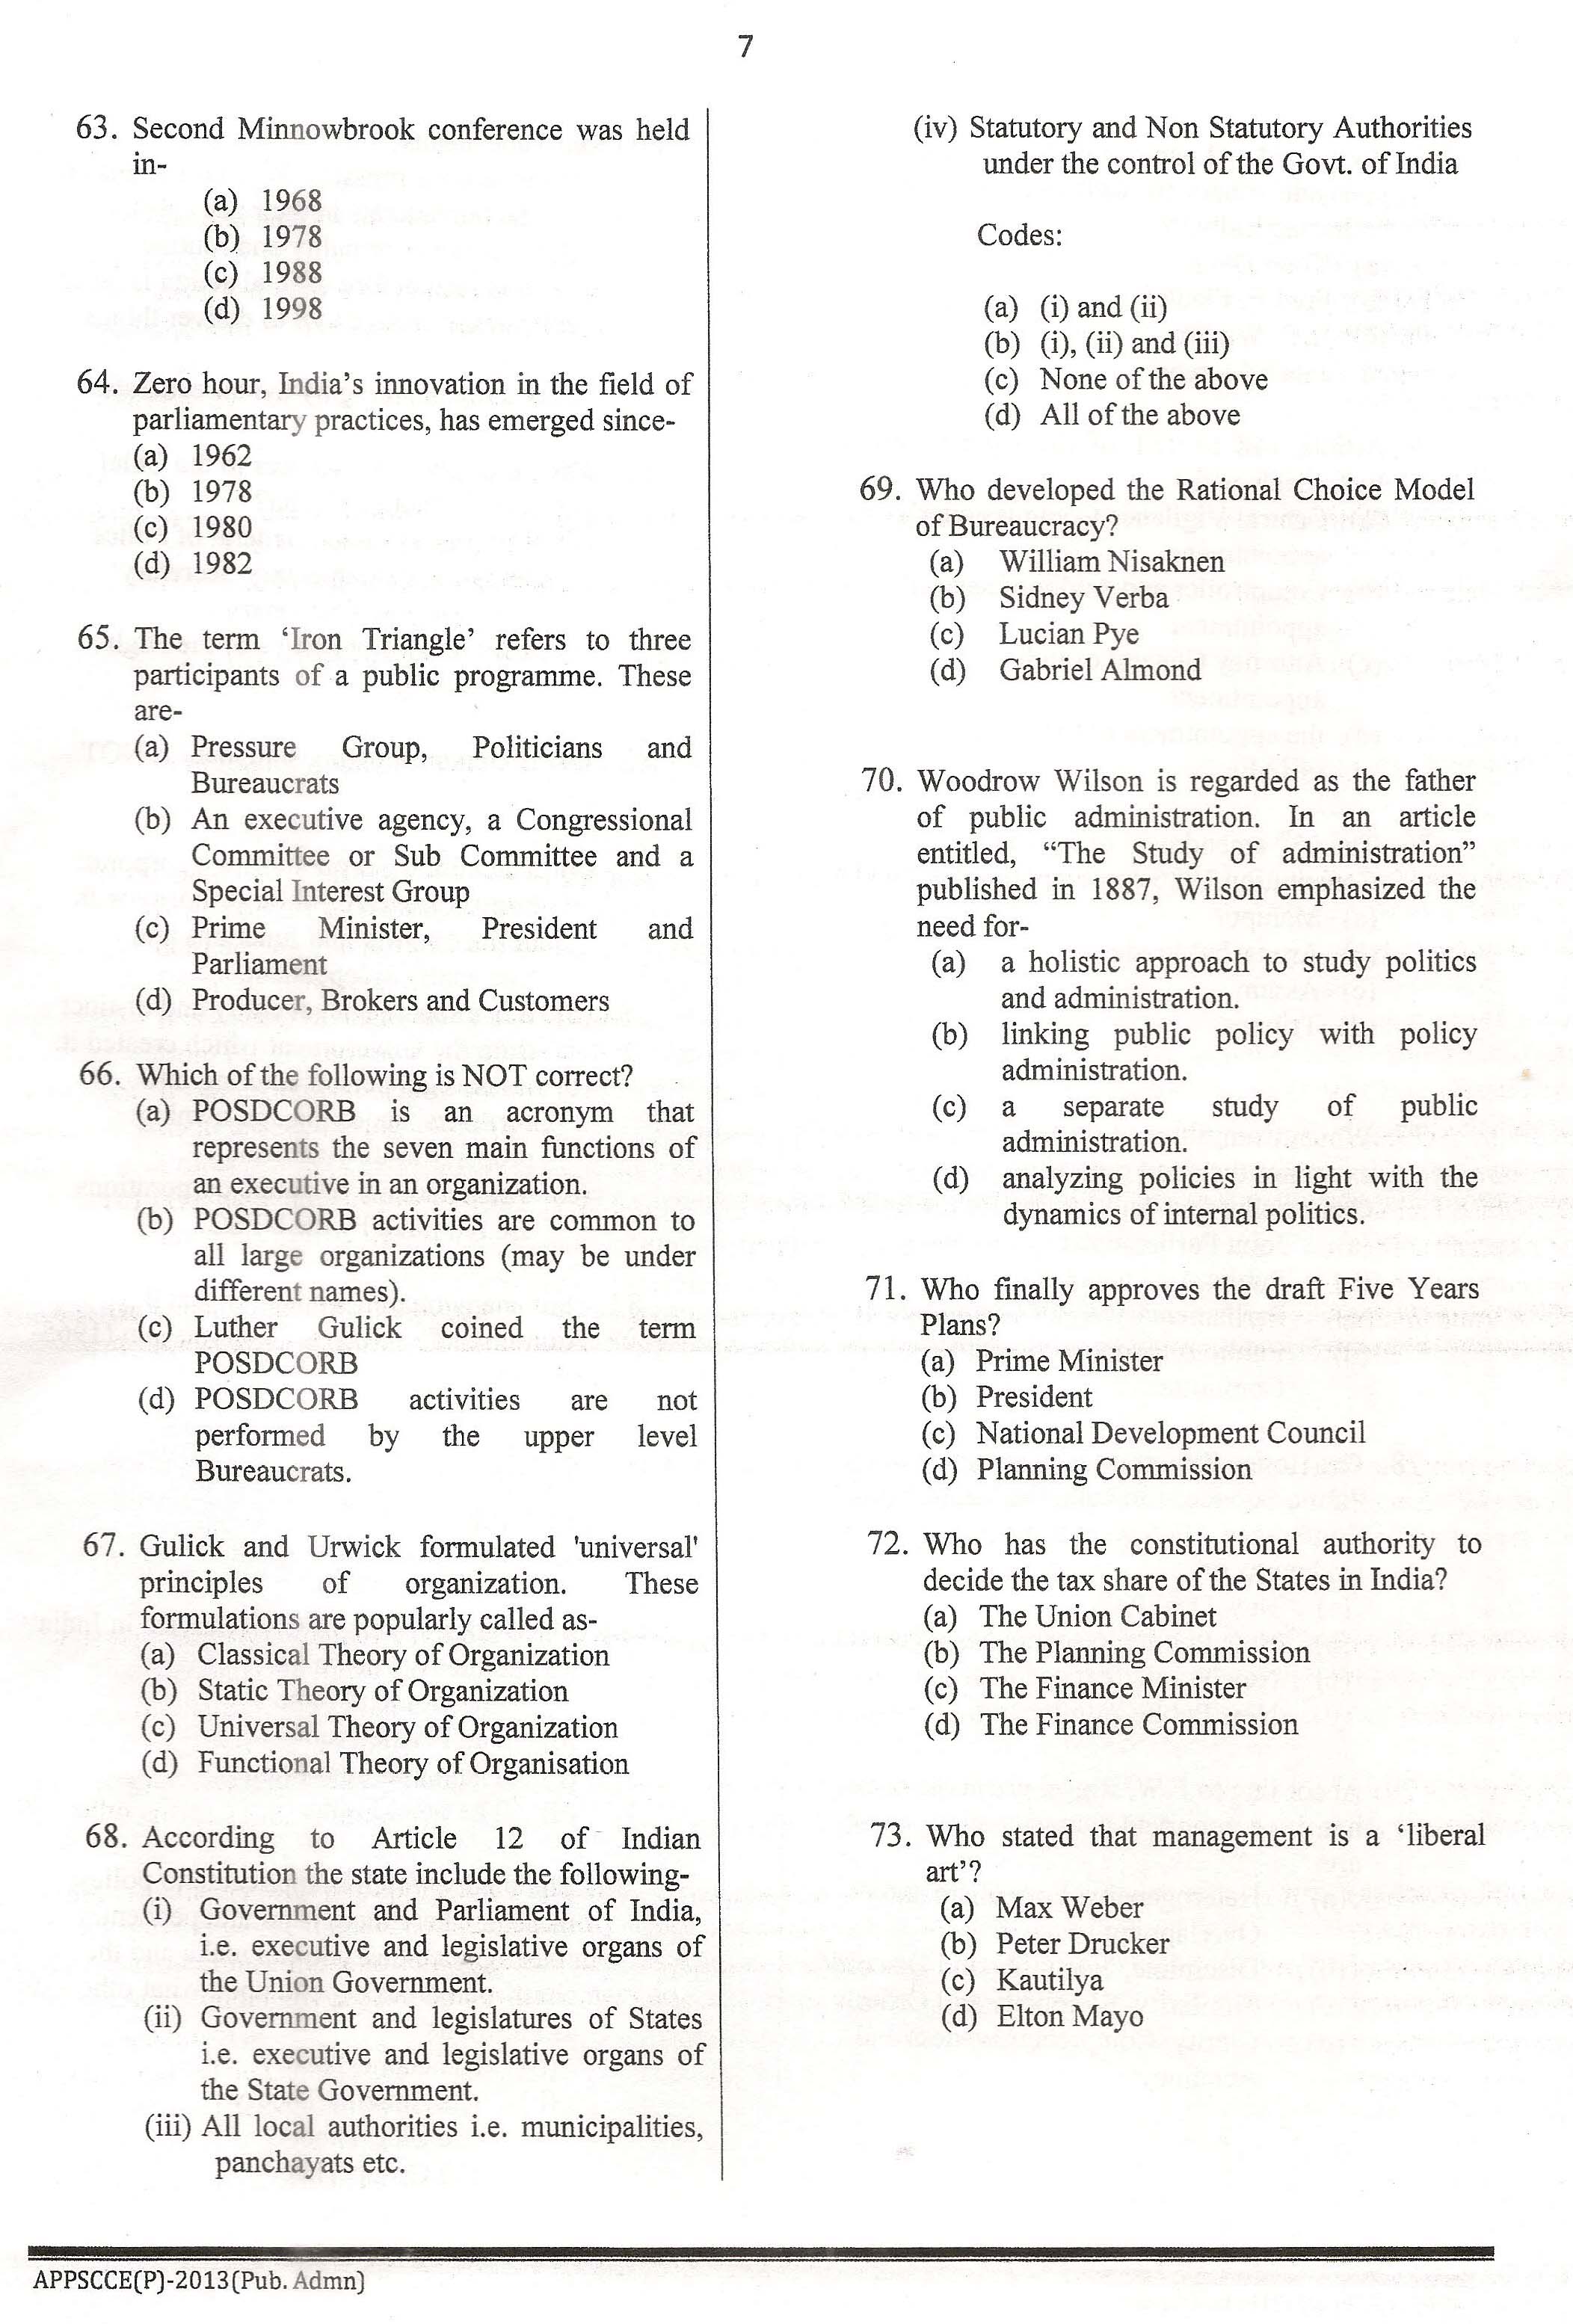 APPSC Combined Competitive Prelims Exam 2013 Public Administration 8